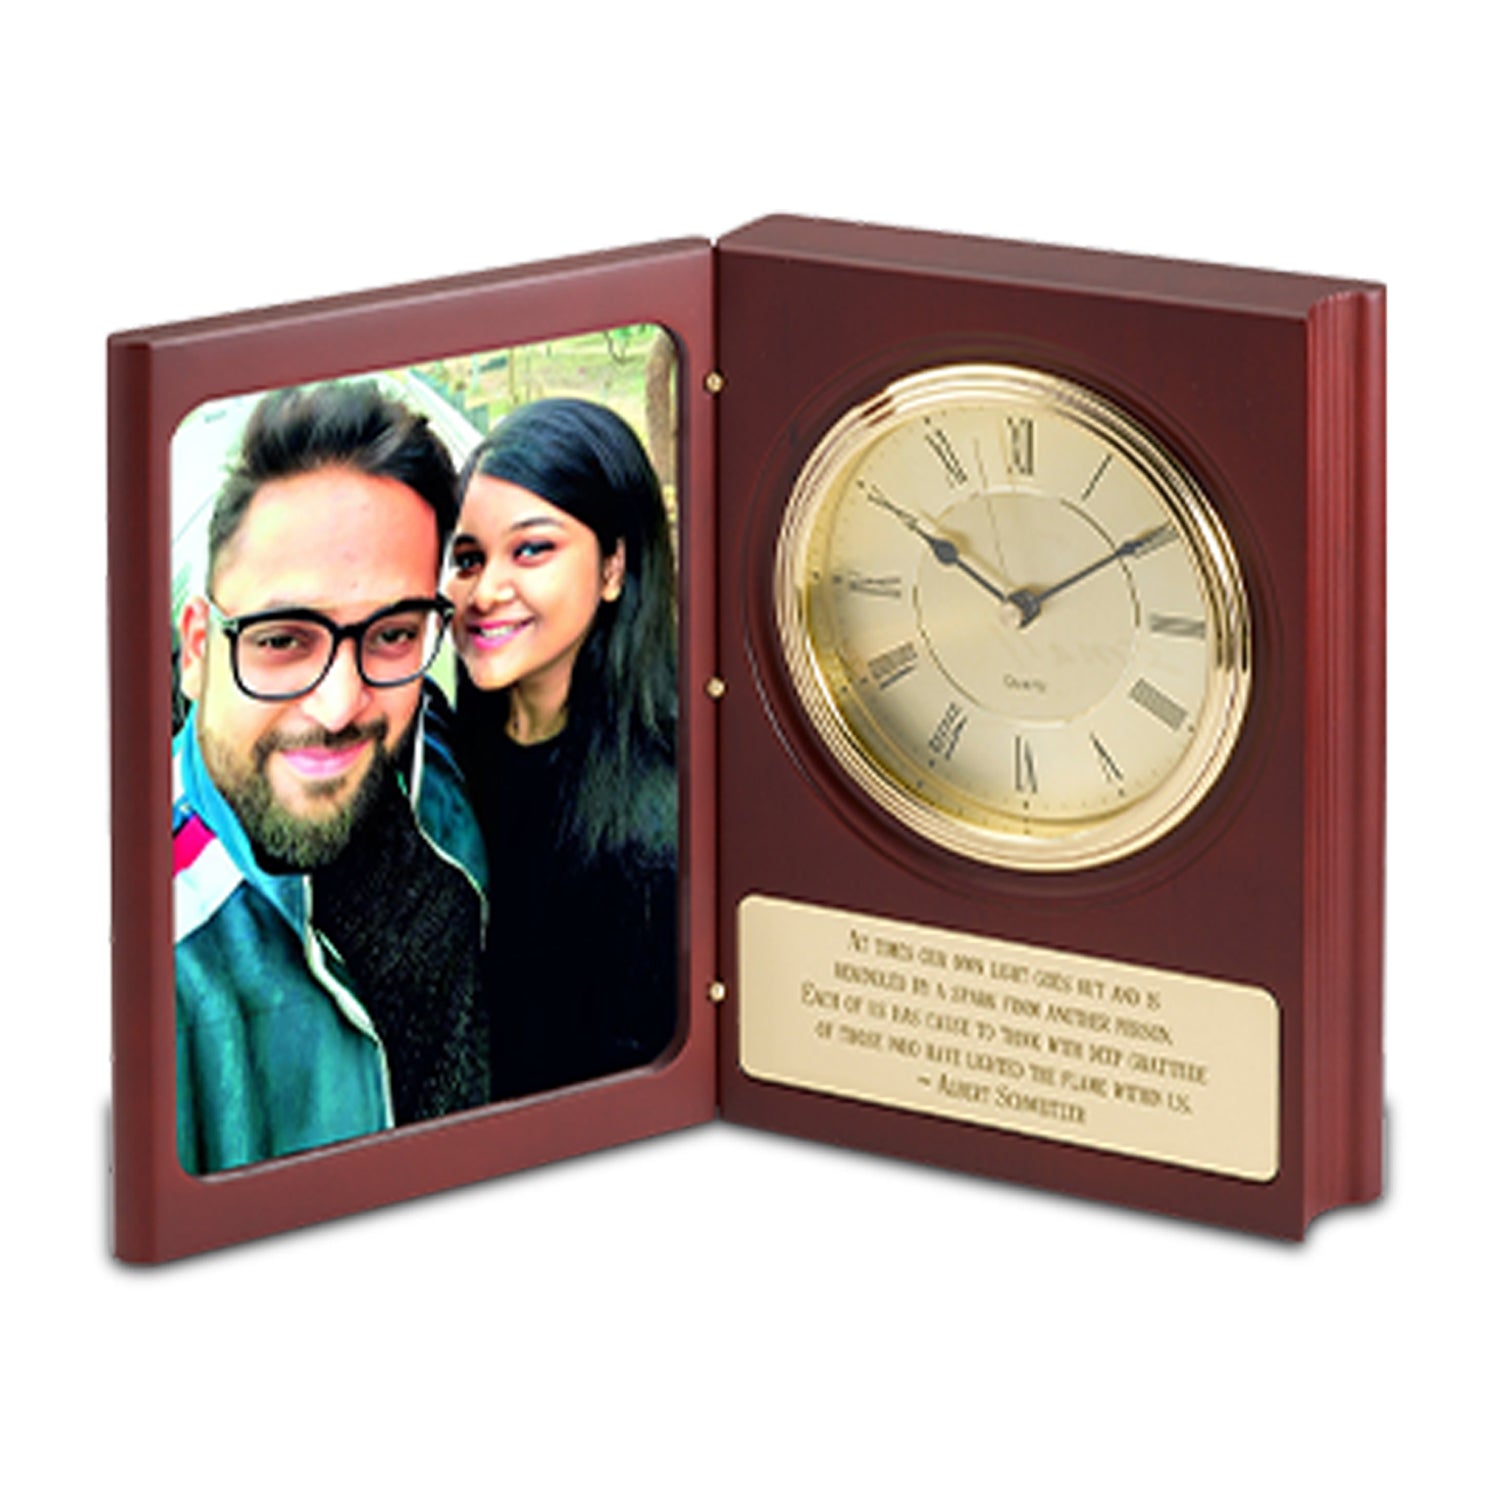 25 Luxury Wedding Gifts For Couples In India | Paintphotographs